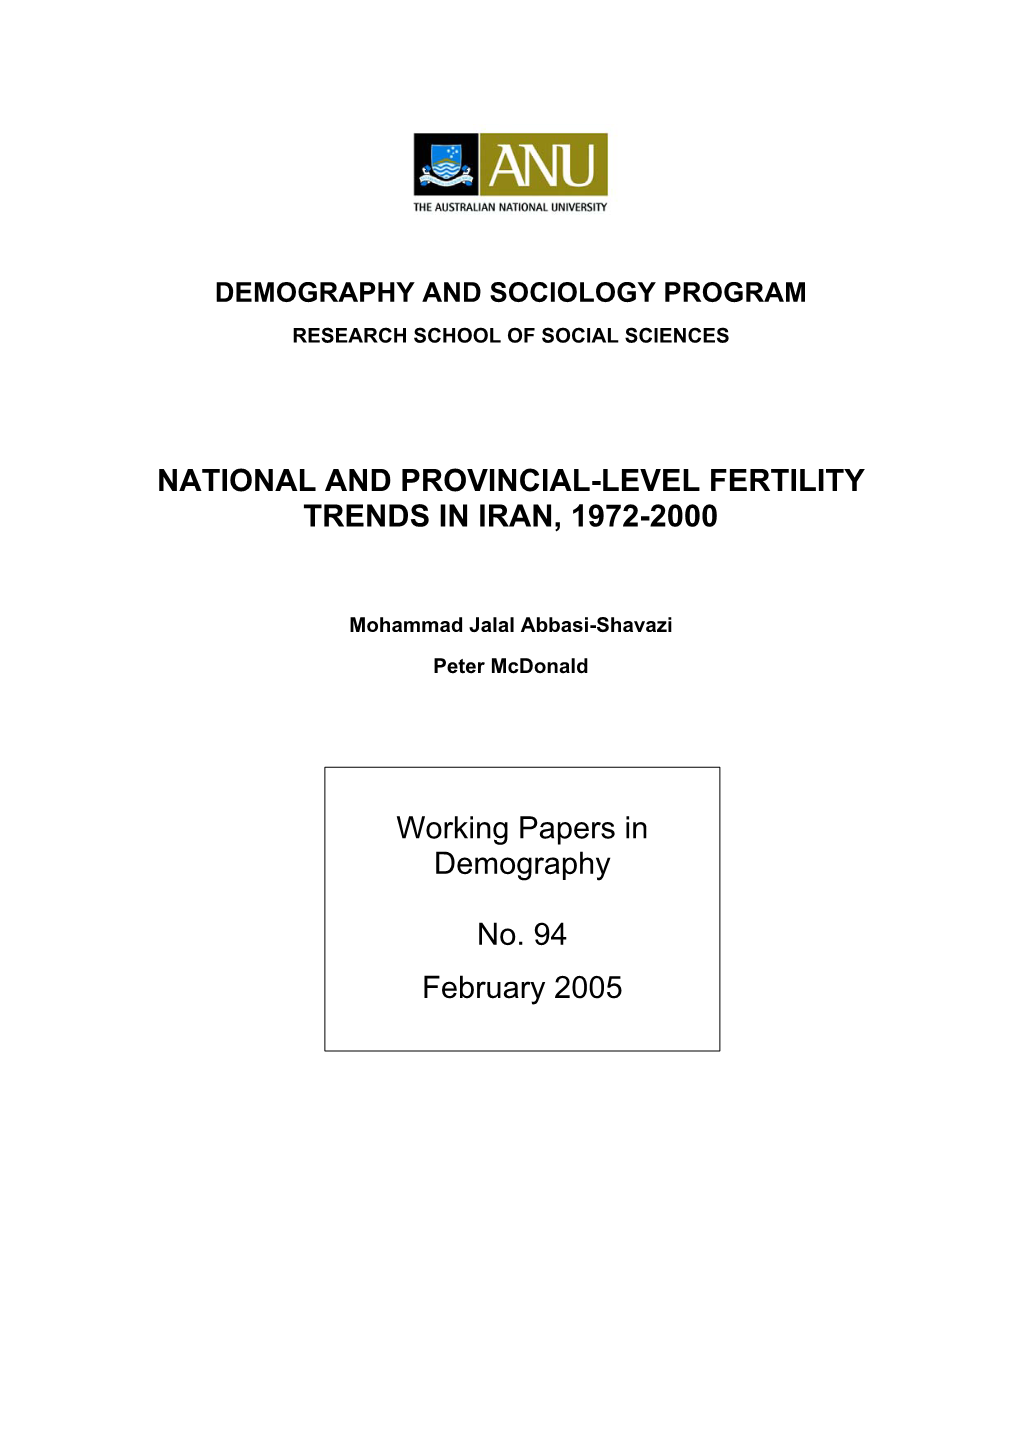 National and Provincial-Level Fertility Trends in Iran, 1972-2000